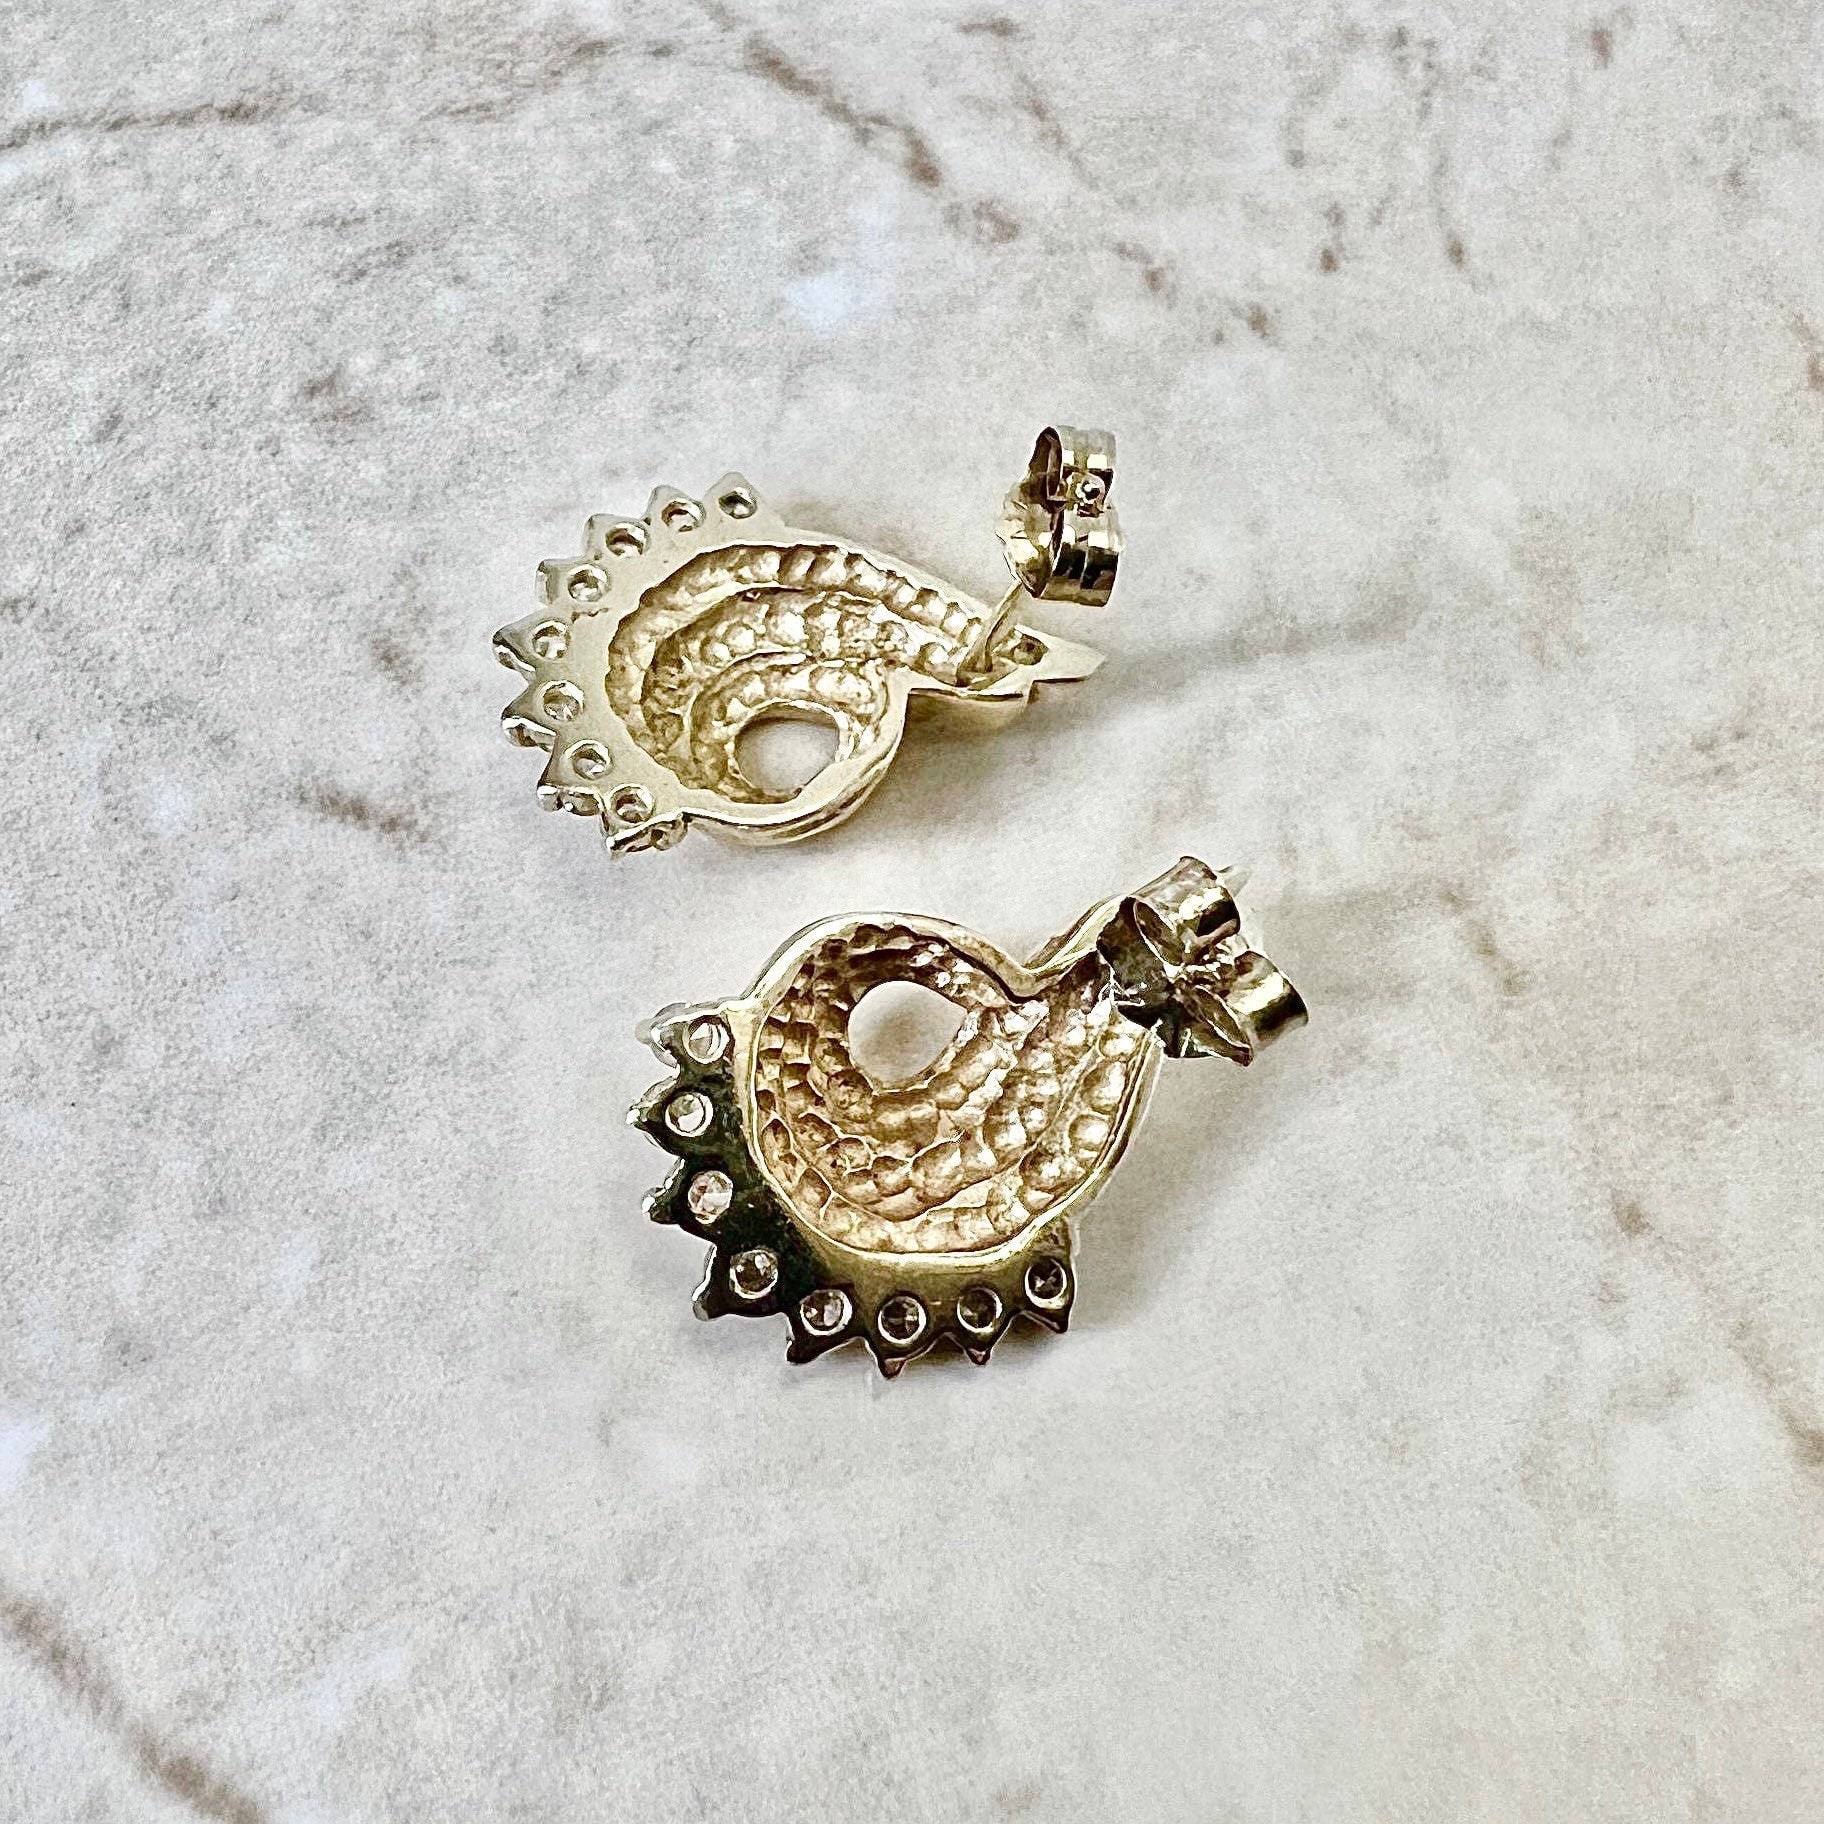 Vintage 14K Gold Diamond Earrings - Sculpted Yellow Gold Earrings - Diamond Cluster Earrings - Birthday Gift - Best Gifts For Her